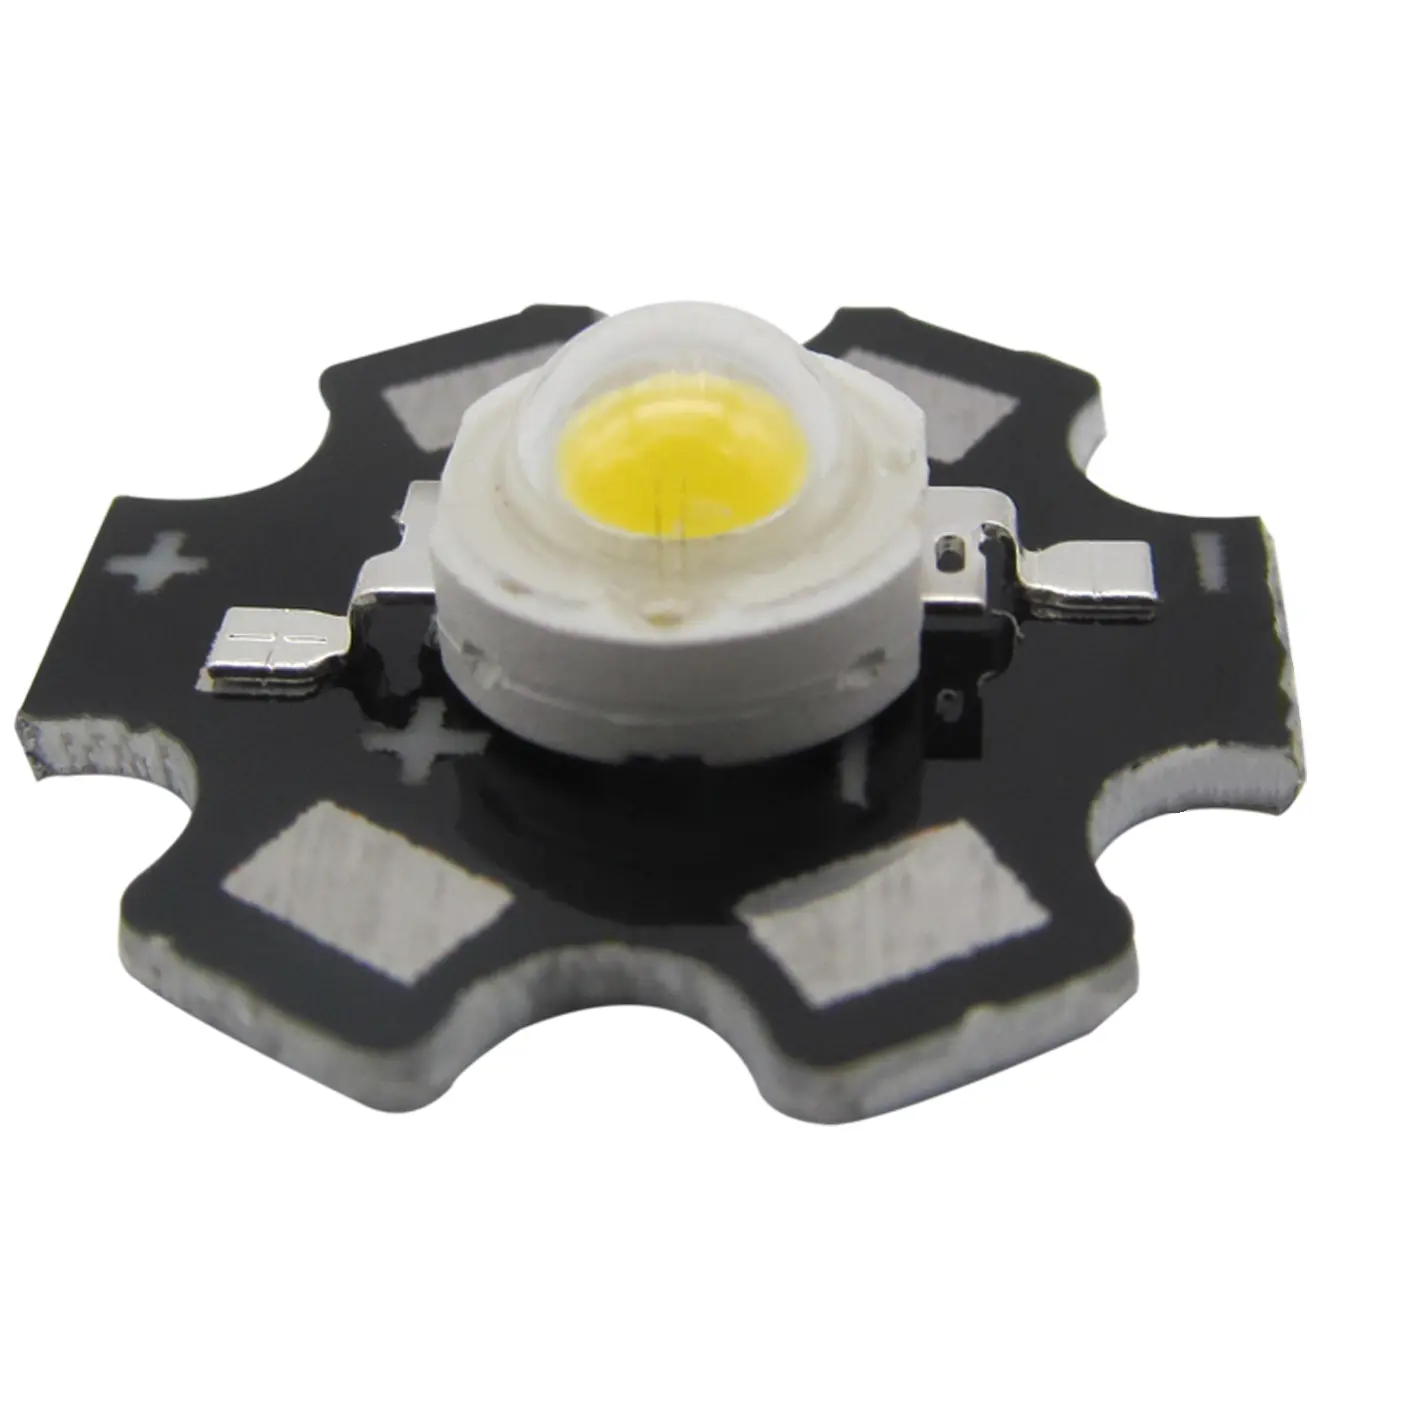 mundstykke På daglig basis Fearless Wholesale Professional Manufacturing 1W Natural white high power LED lamp  3V 4000-4500k High Power Led Chip with heatsink PCB From m.alibaba.com